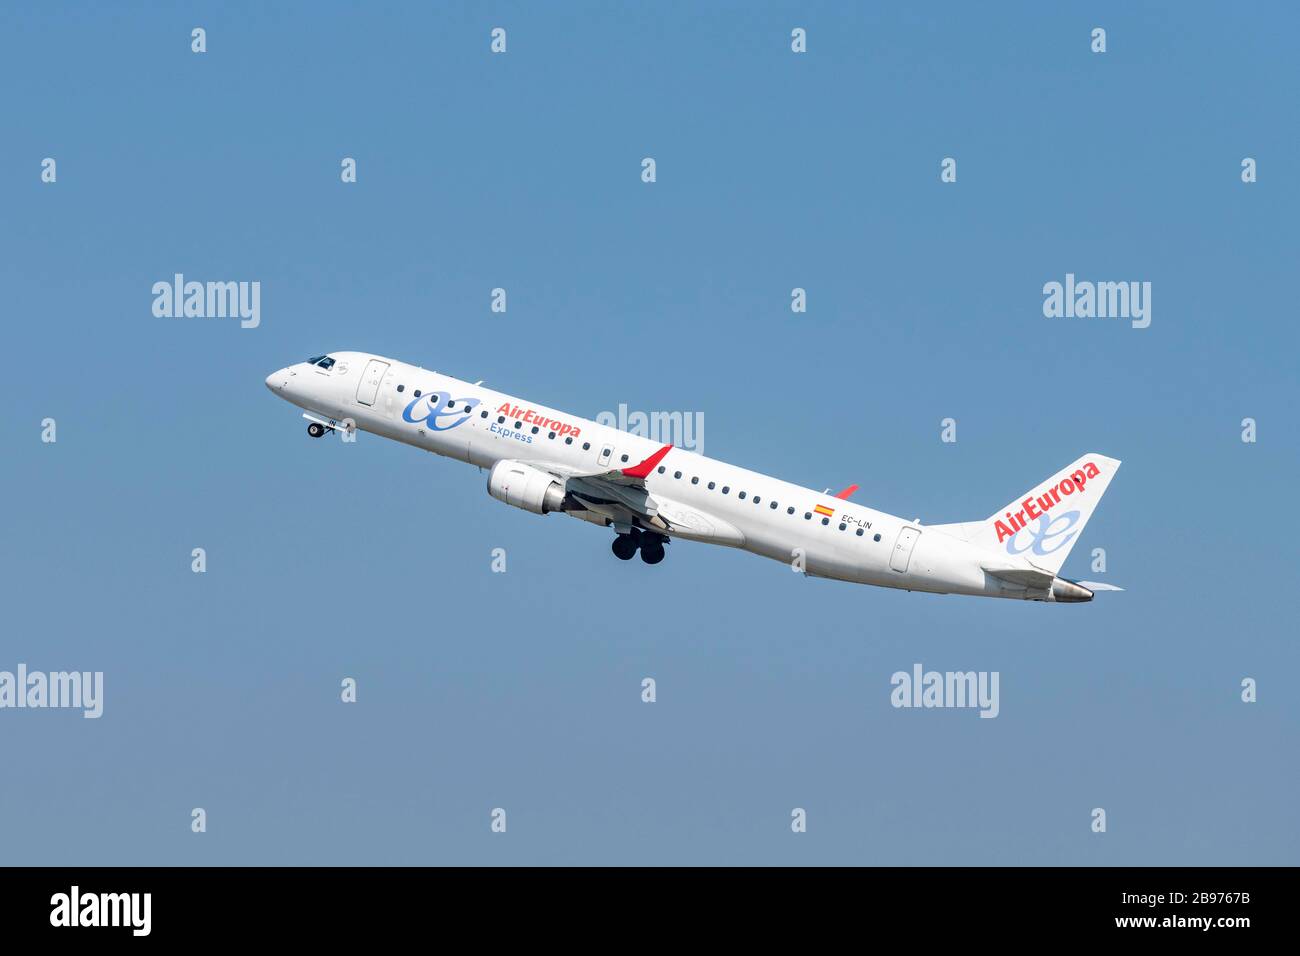 Air Europa's Embraer 195 takes off from Zurich Airport, Switzerland Stock Photo